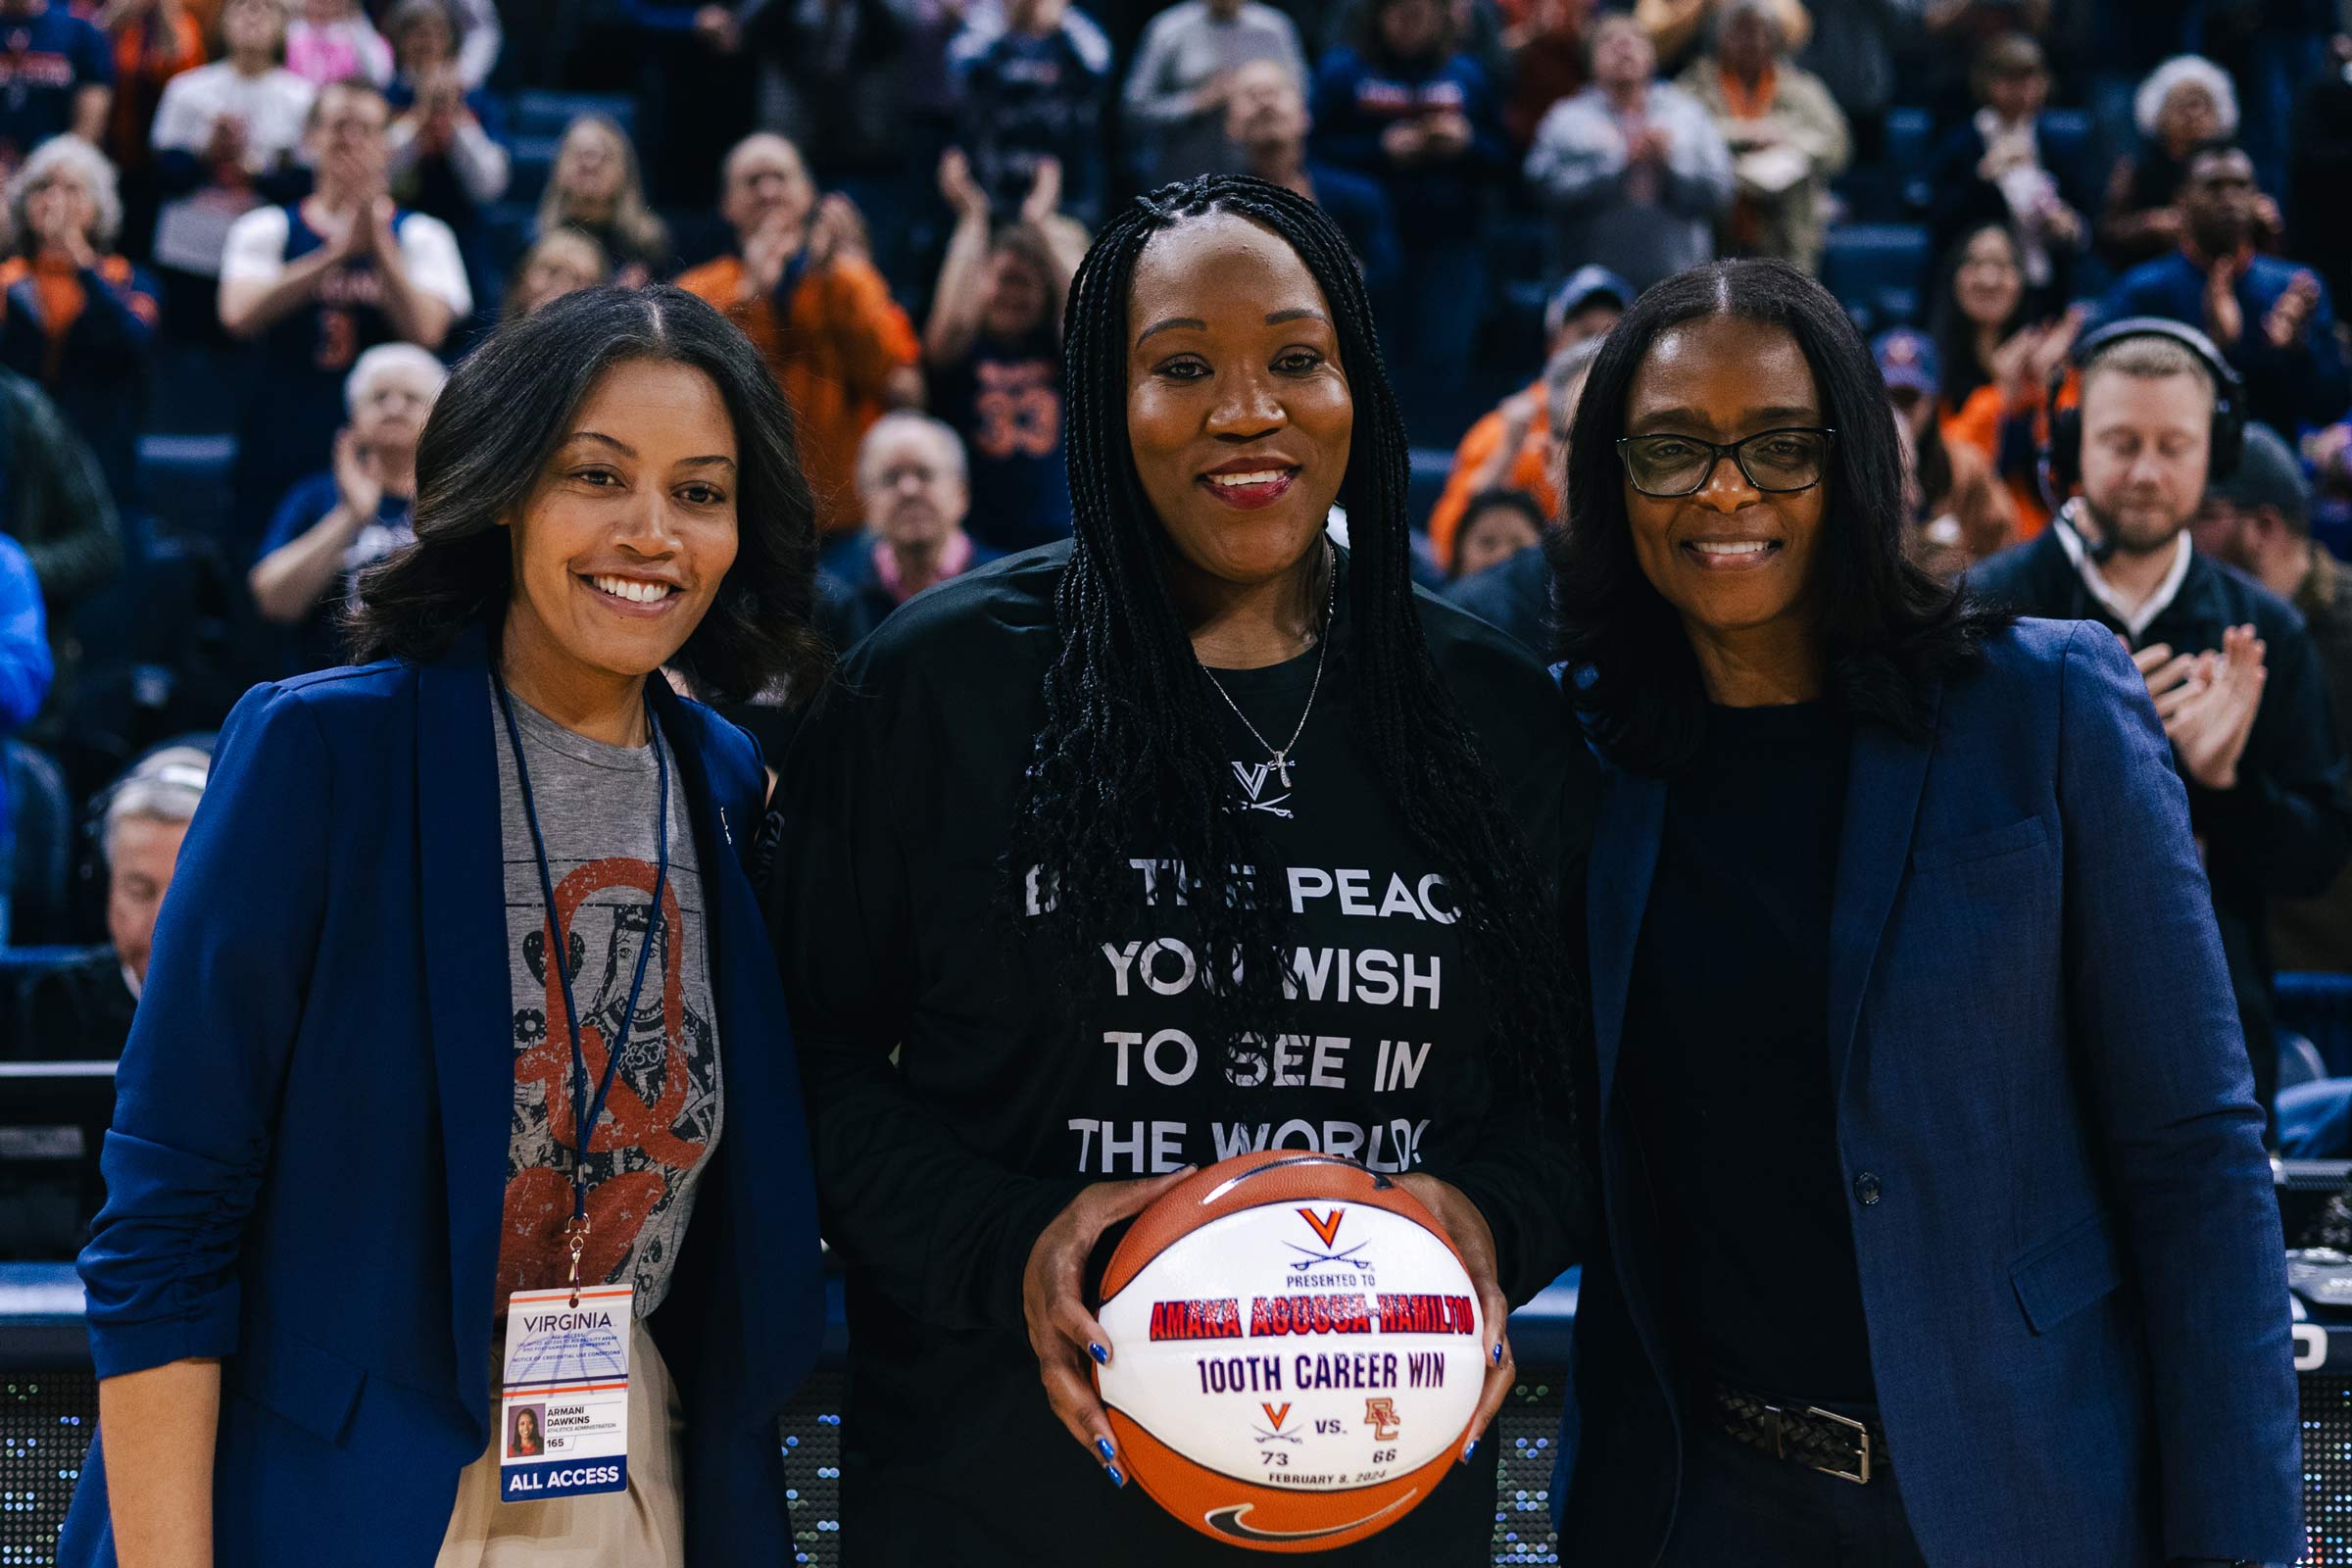 A powerful trio of women in the UVA athletics team gather together for a photo